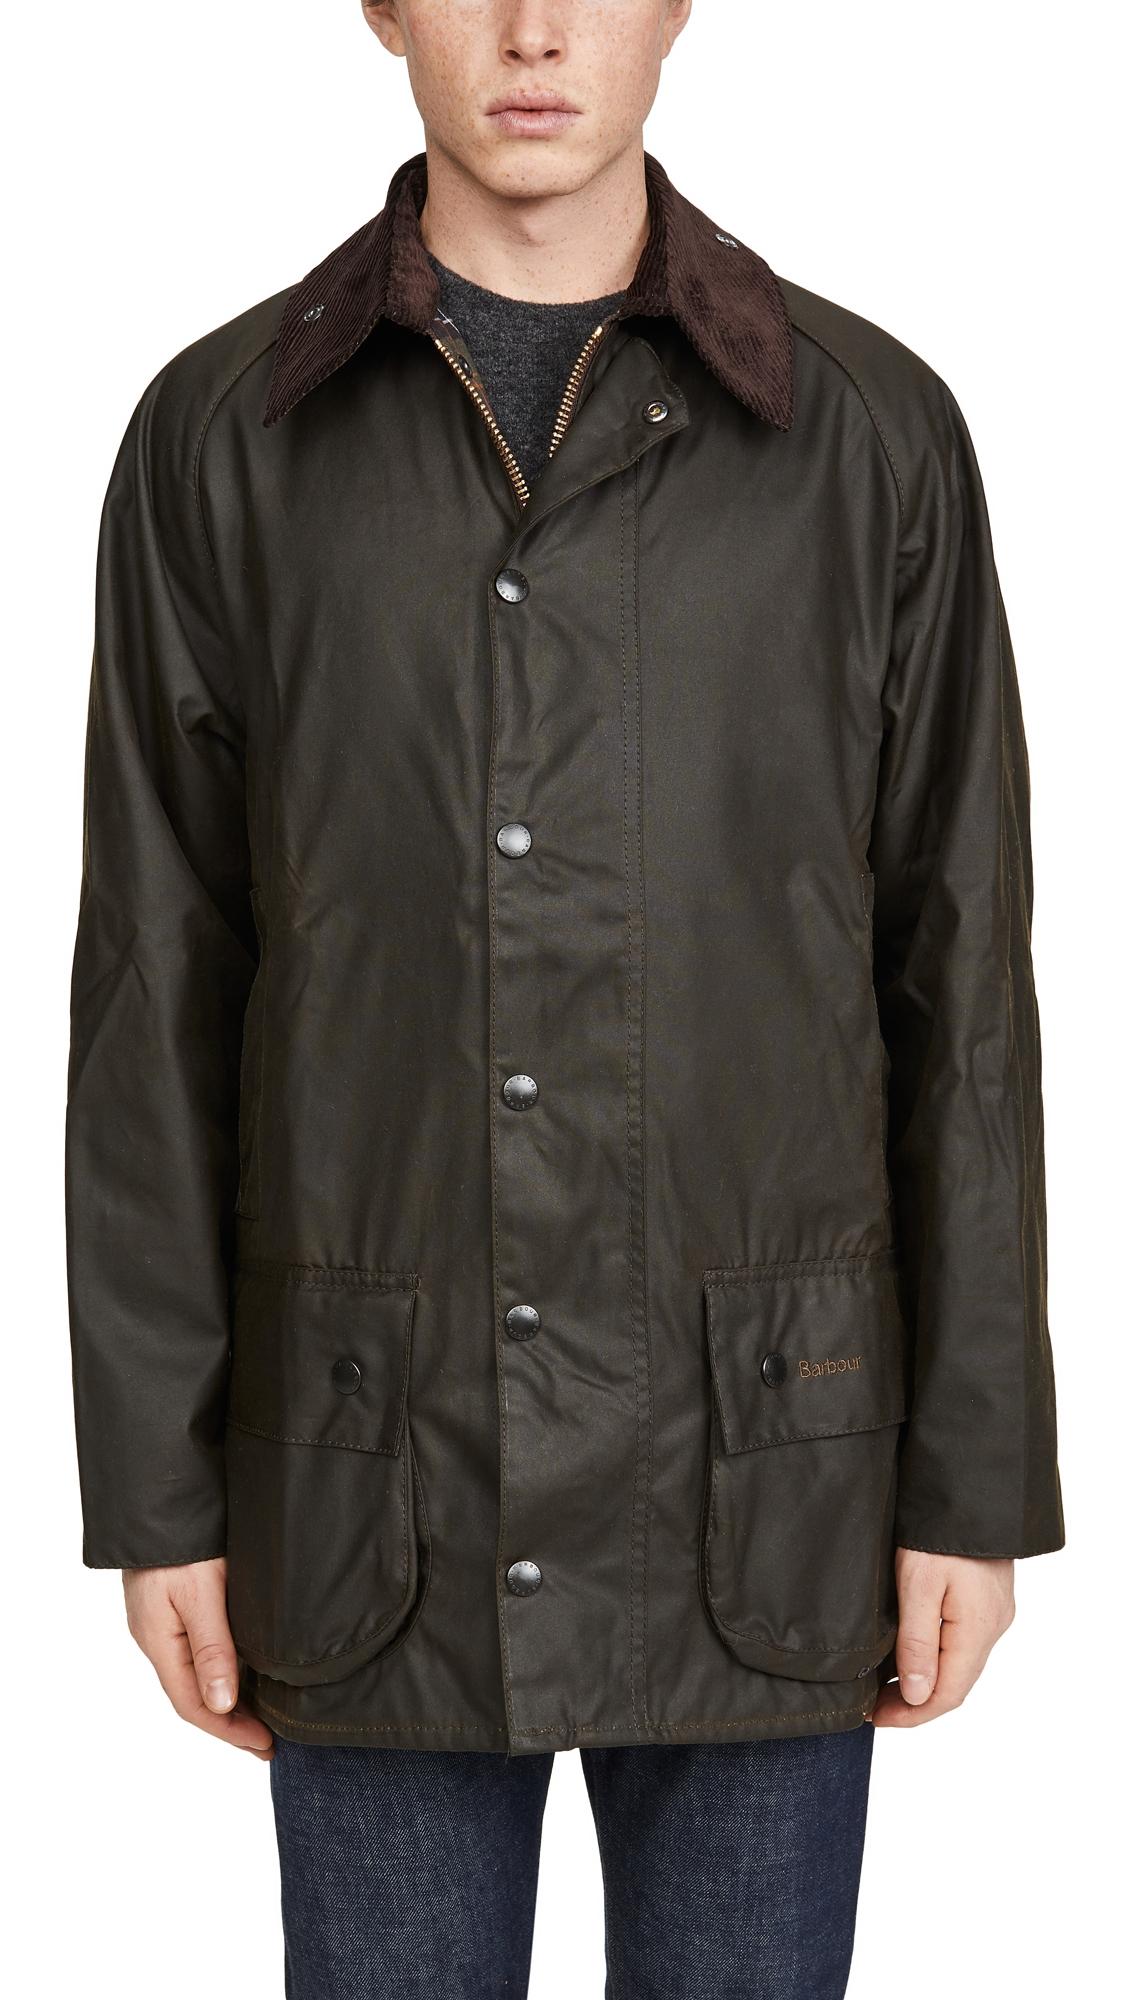 Barbour Canvas Classic Beaufort Wax Jacket in Olive (Green) for Men - Lyst